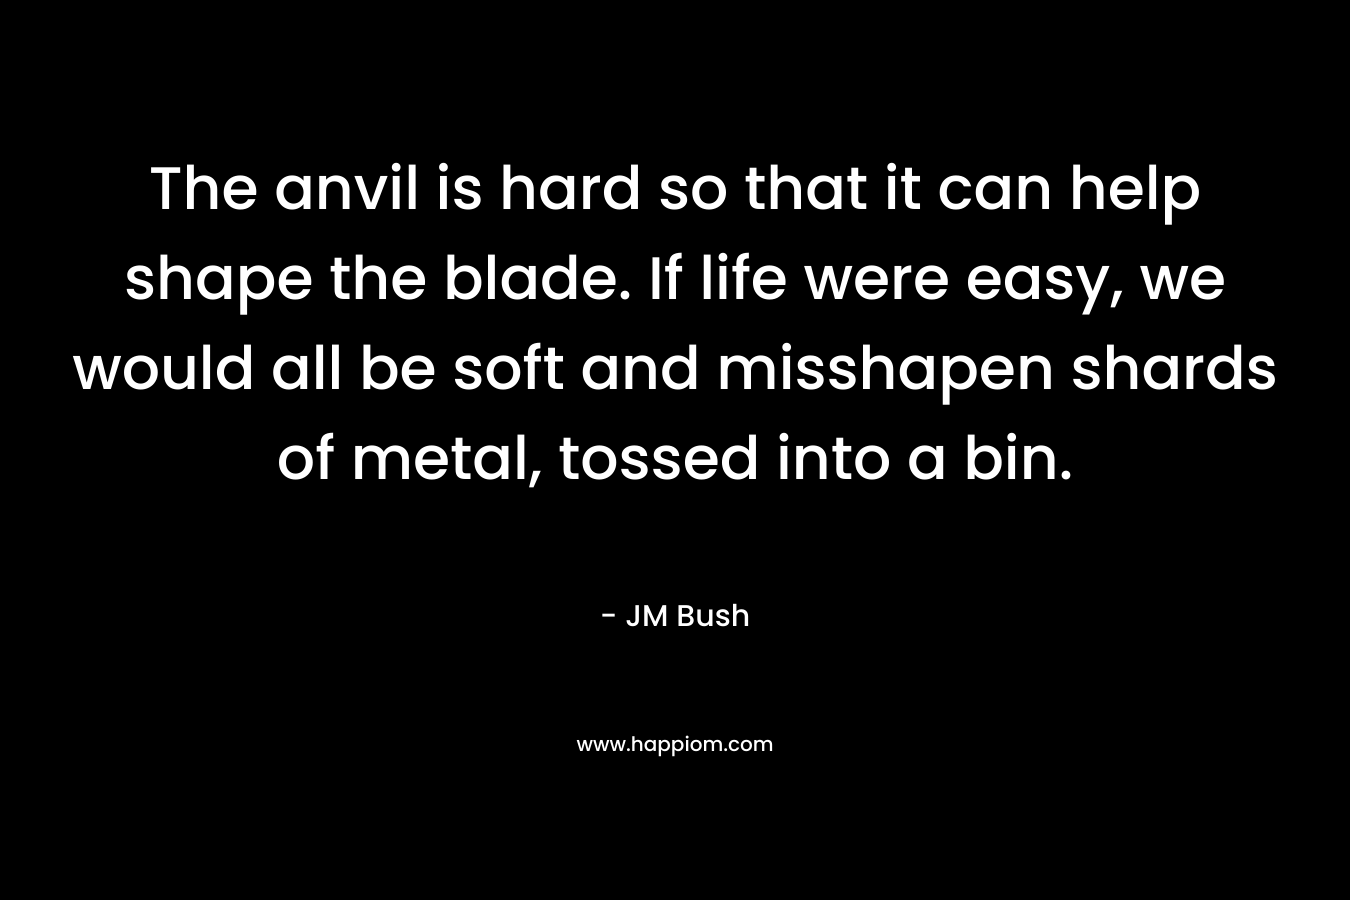 The anvil is hard so that it can help shape the blade. If life were easy, we would all be soft and misshapen shards of metal, tossed into a bin. – JM Bush